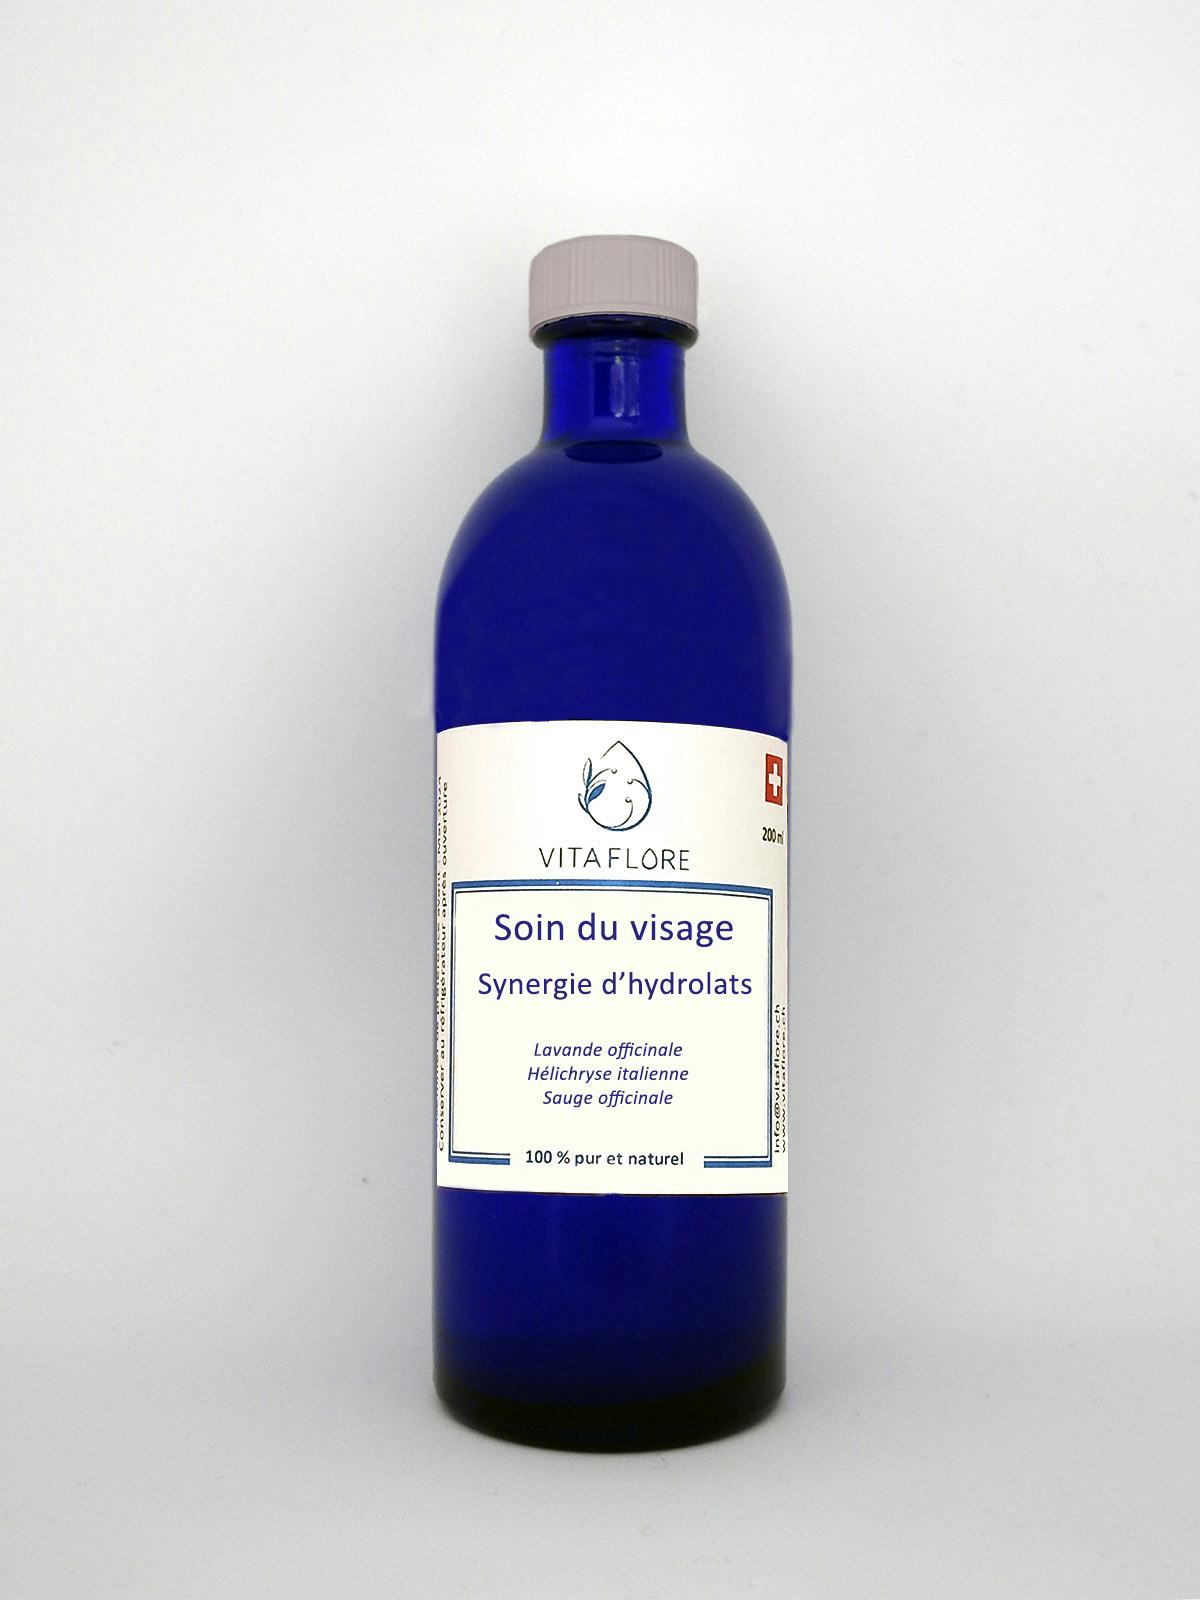 Synergie d’hydrolats – Soin du visage, artisanal product for direct sale in Switzerland